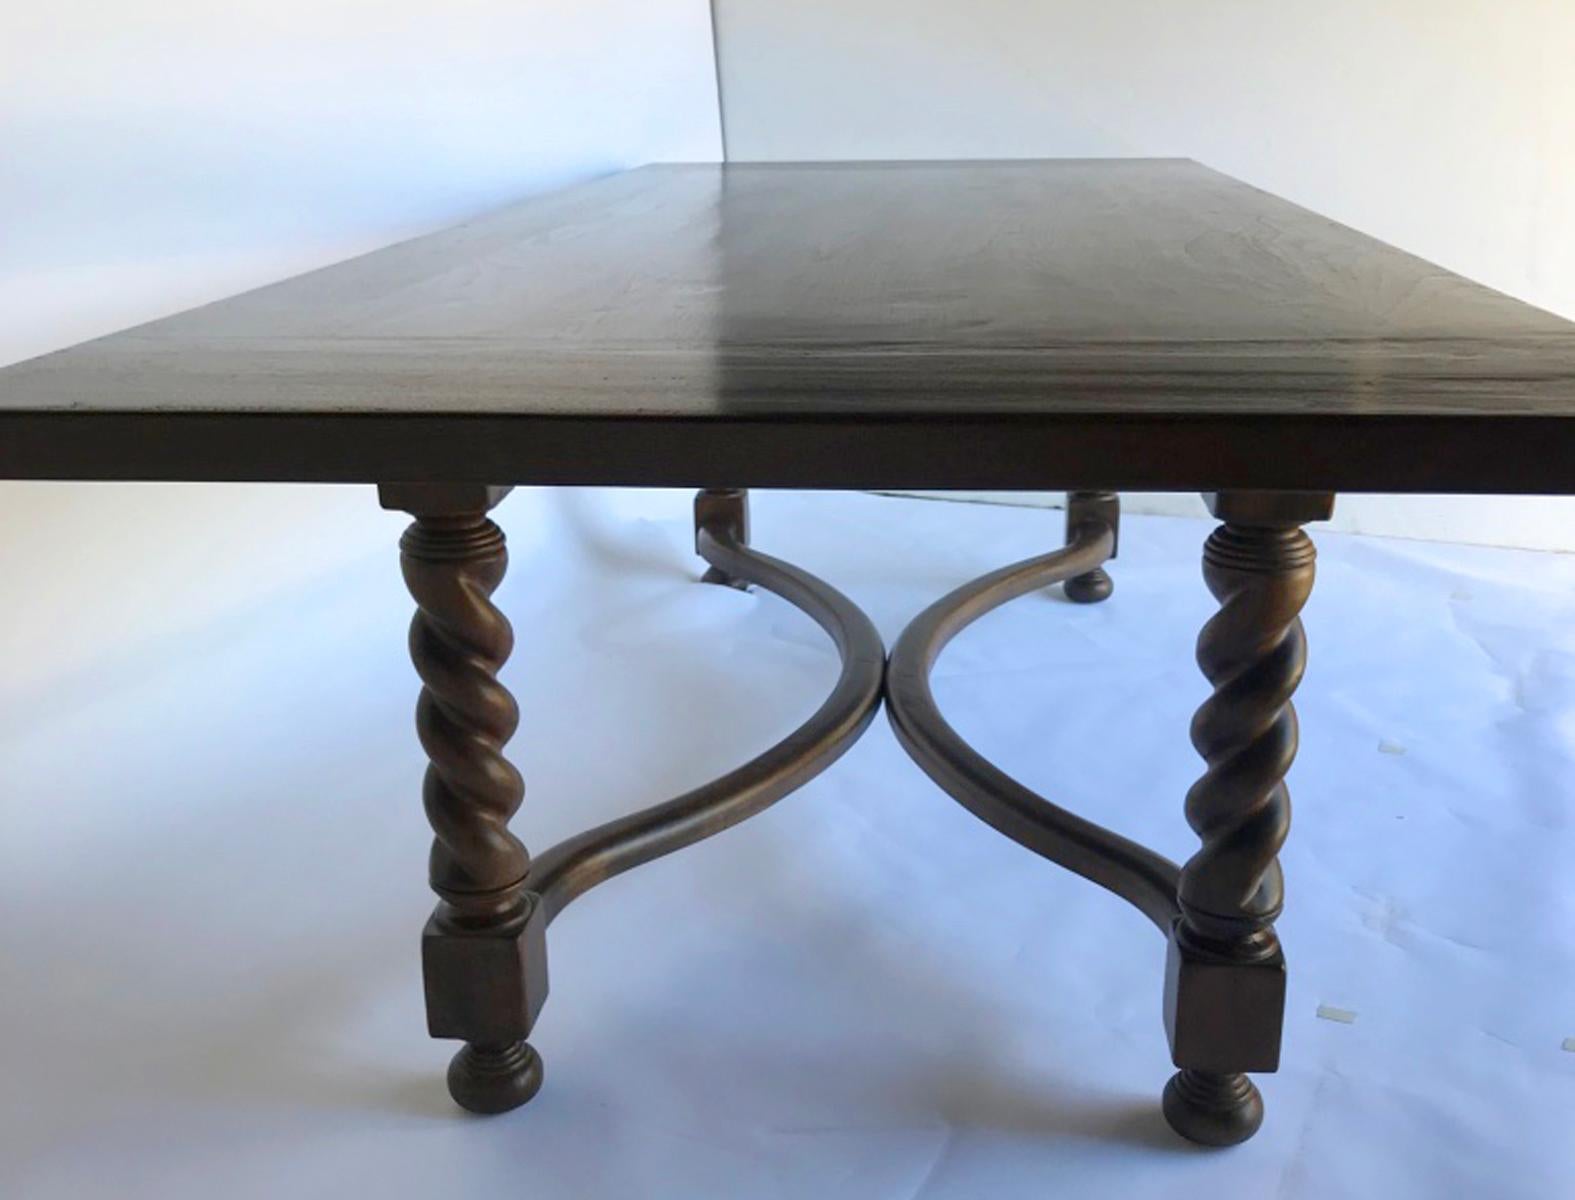 Spanish Colonial Dos Gallos Custom Barley Twist Dining Table with Curved Stretcher